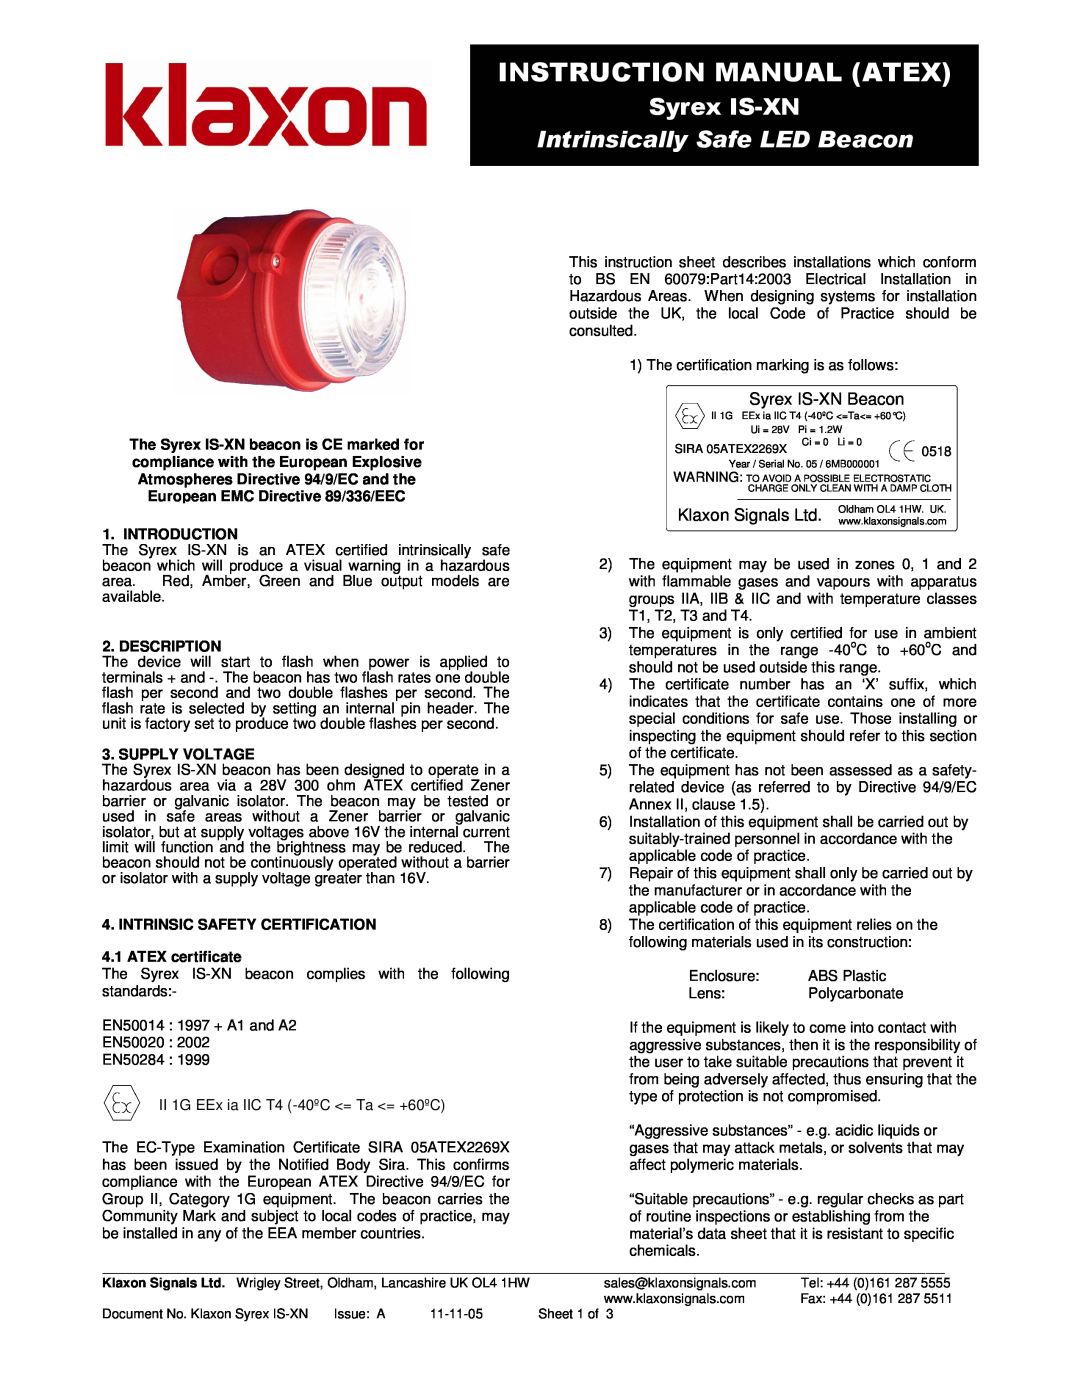 Klaxon Syrex IS-XN instruction sheet Introduction, Description, Supply Voltage, Intrinsic Safety Certification 